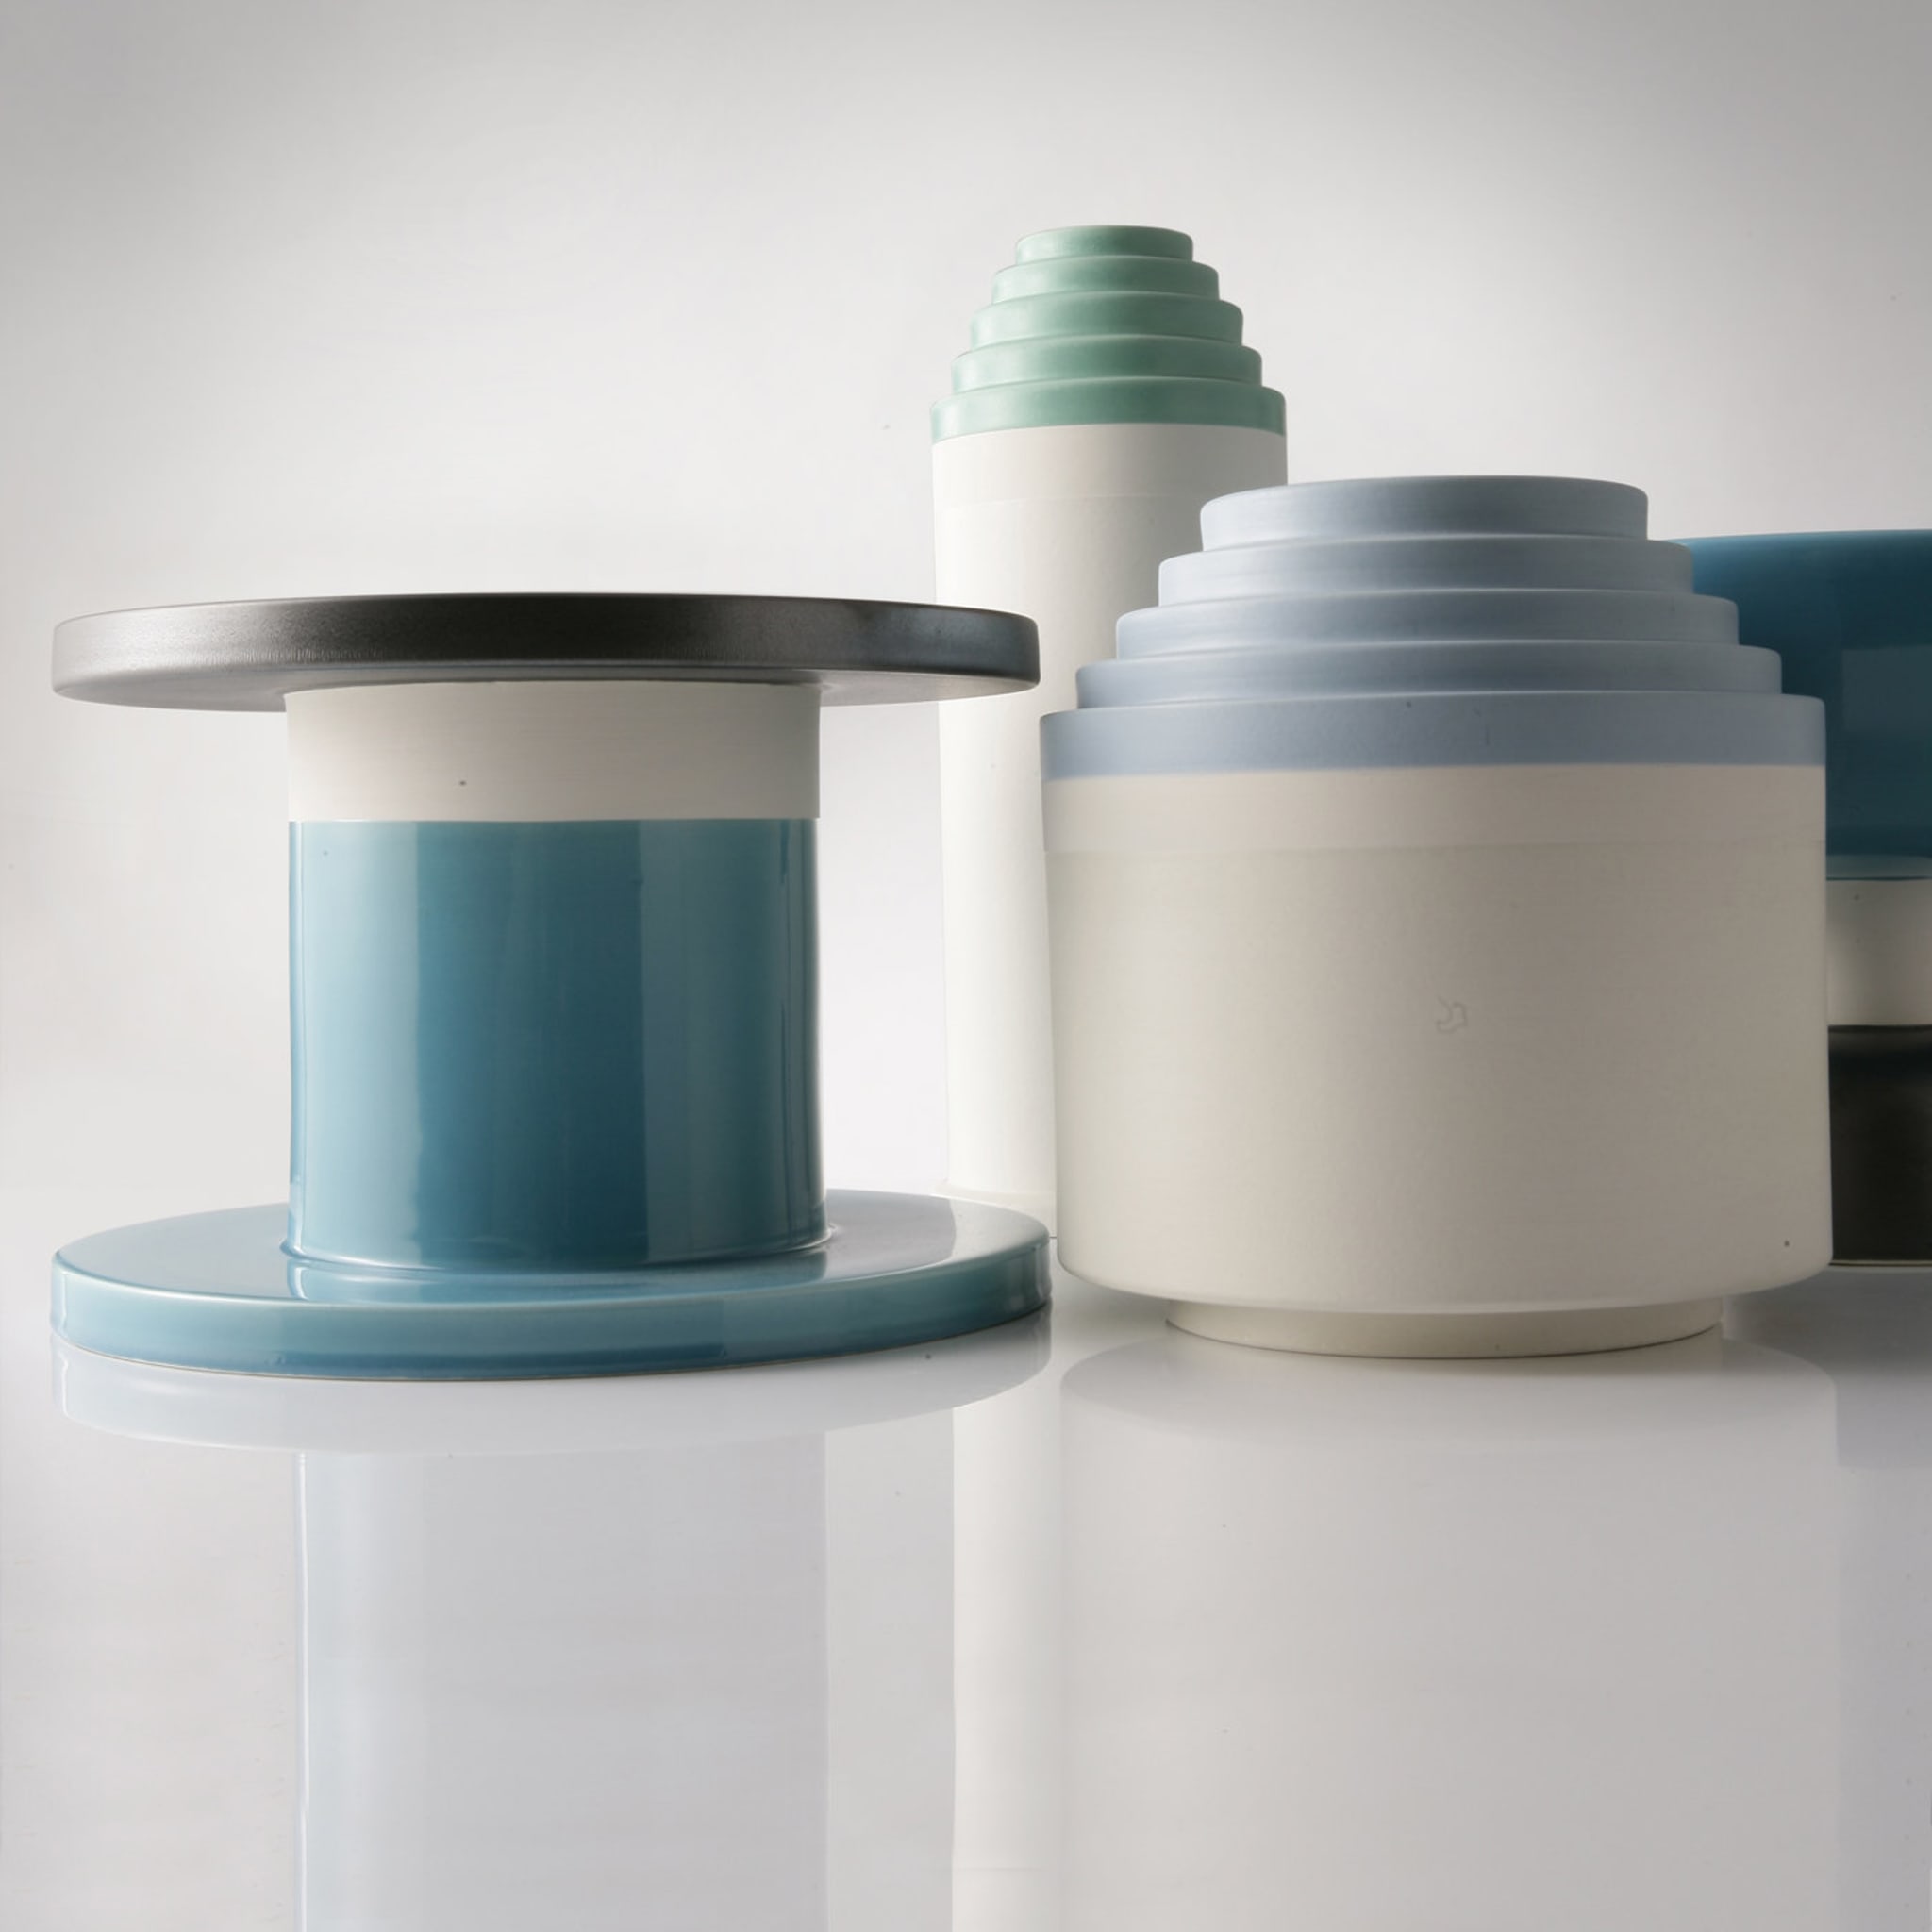 Small Round Turquoise Vase by Ettore Sottsass - Alternative view 1